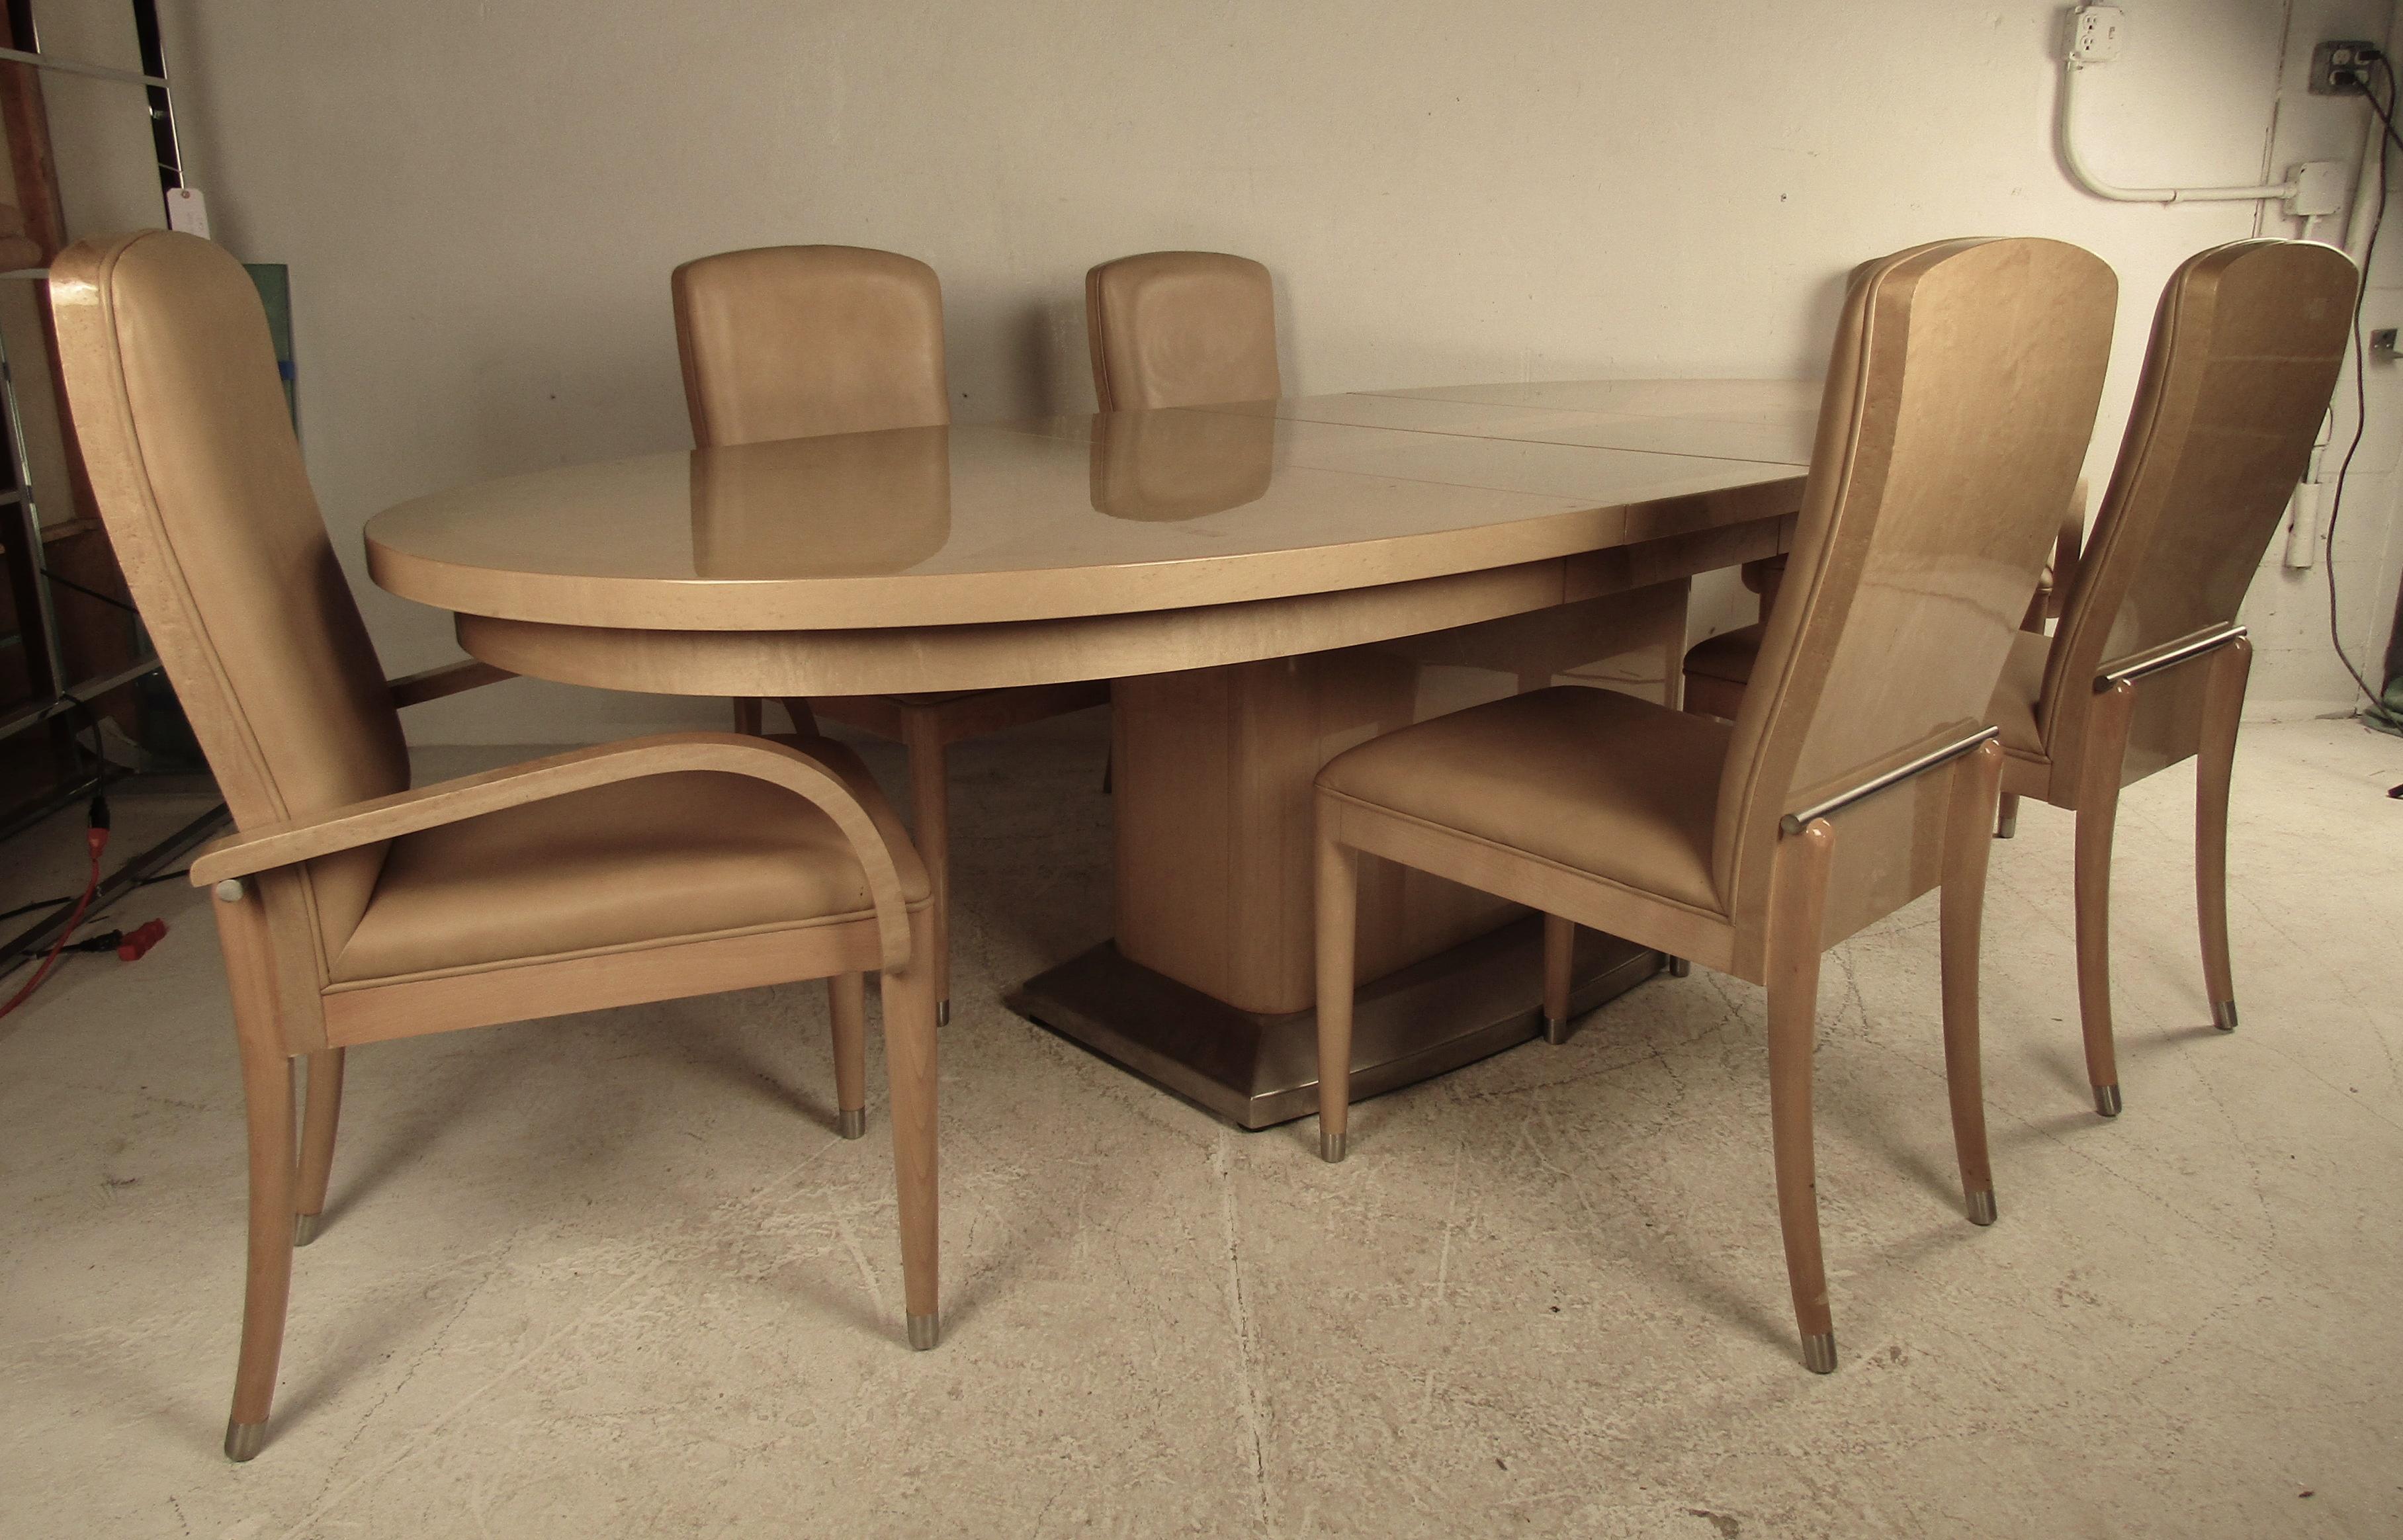 This beautiful vintage modern Italian dining set includes a large oval dining table with two leaves and six chairs. A luxurious dining table that extends from 78.5 inches wide to 113 inches wide. A sleek a comfortable dining set with two armchairs